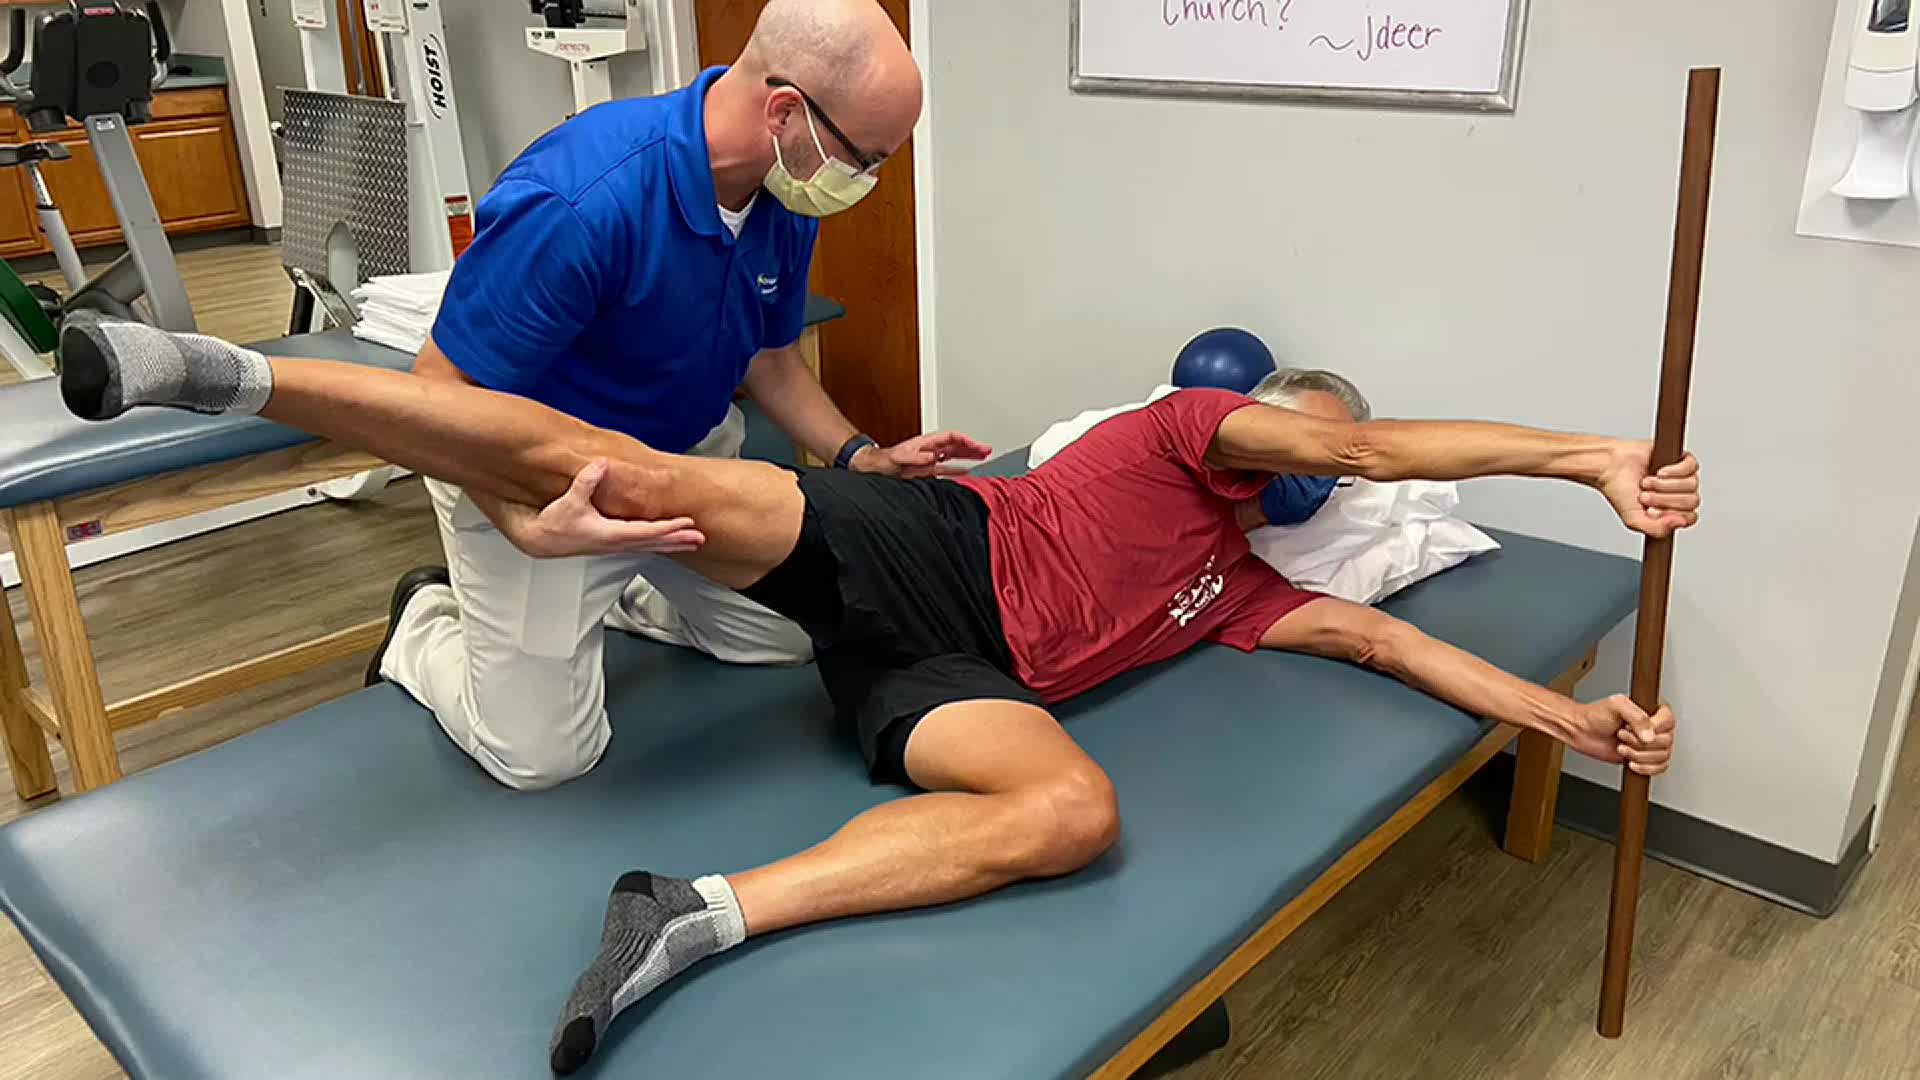 These physical therapists have a new approach for strengthening